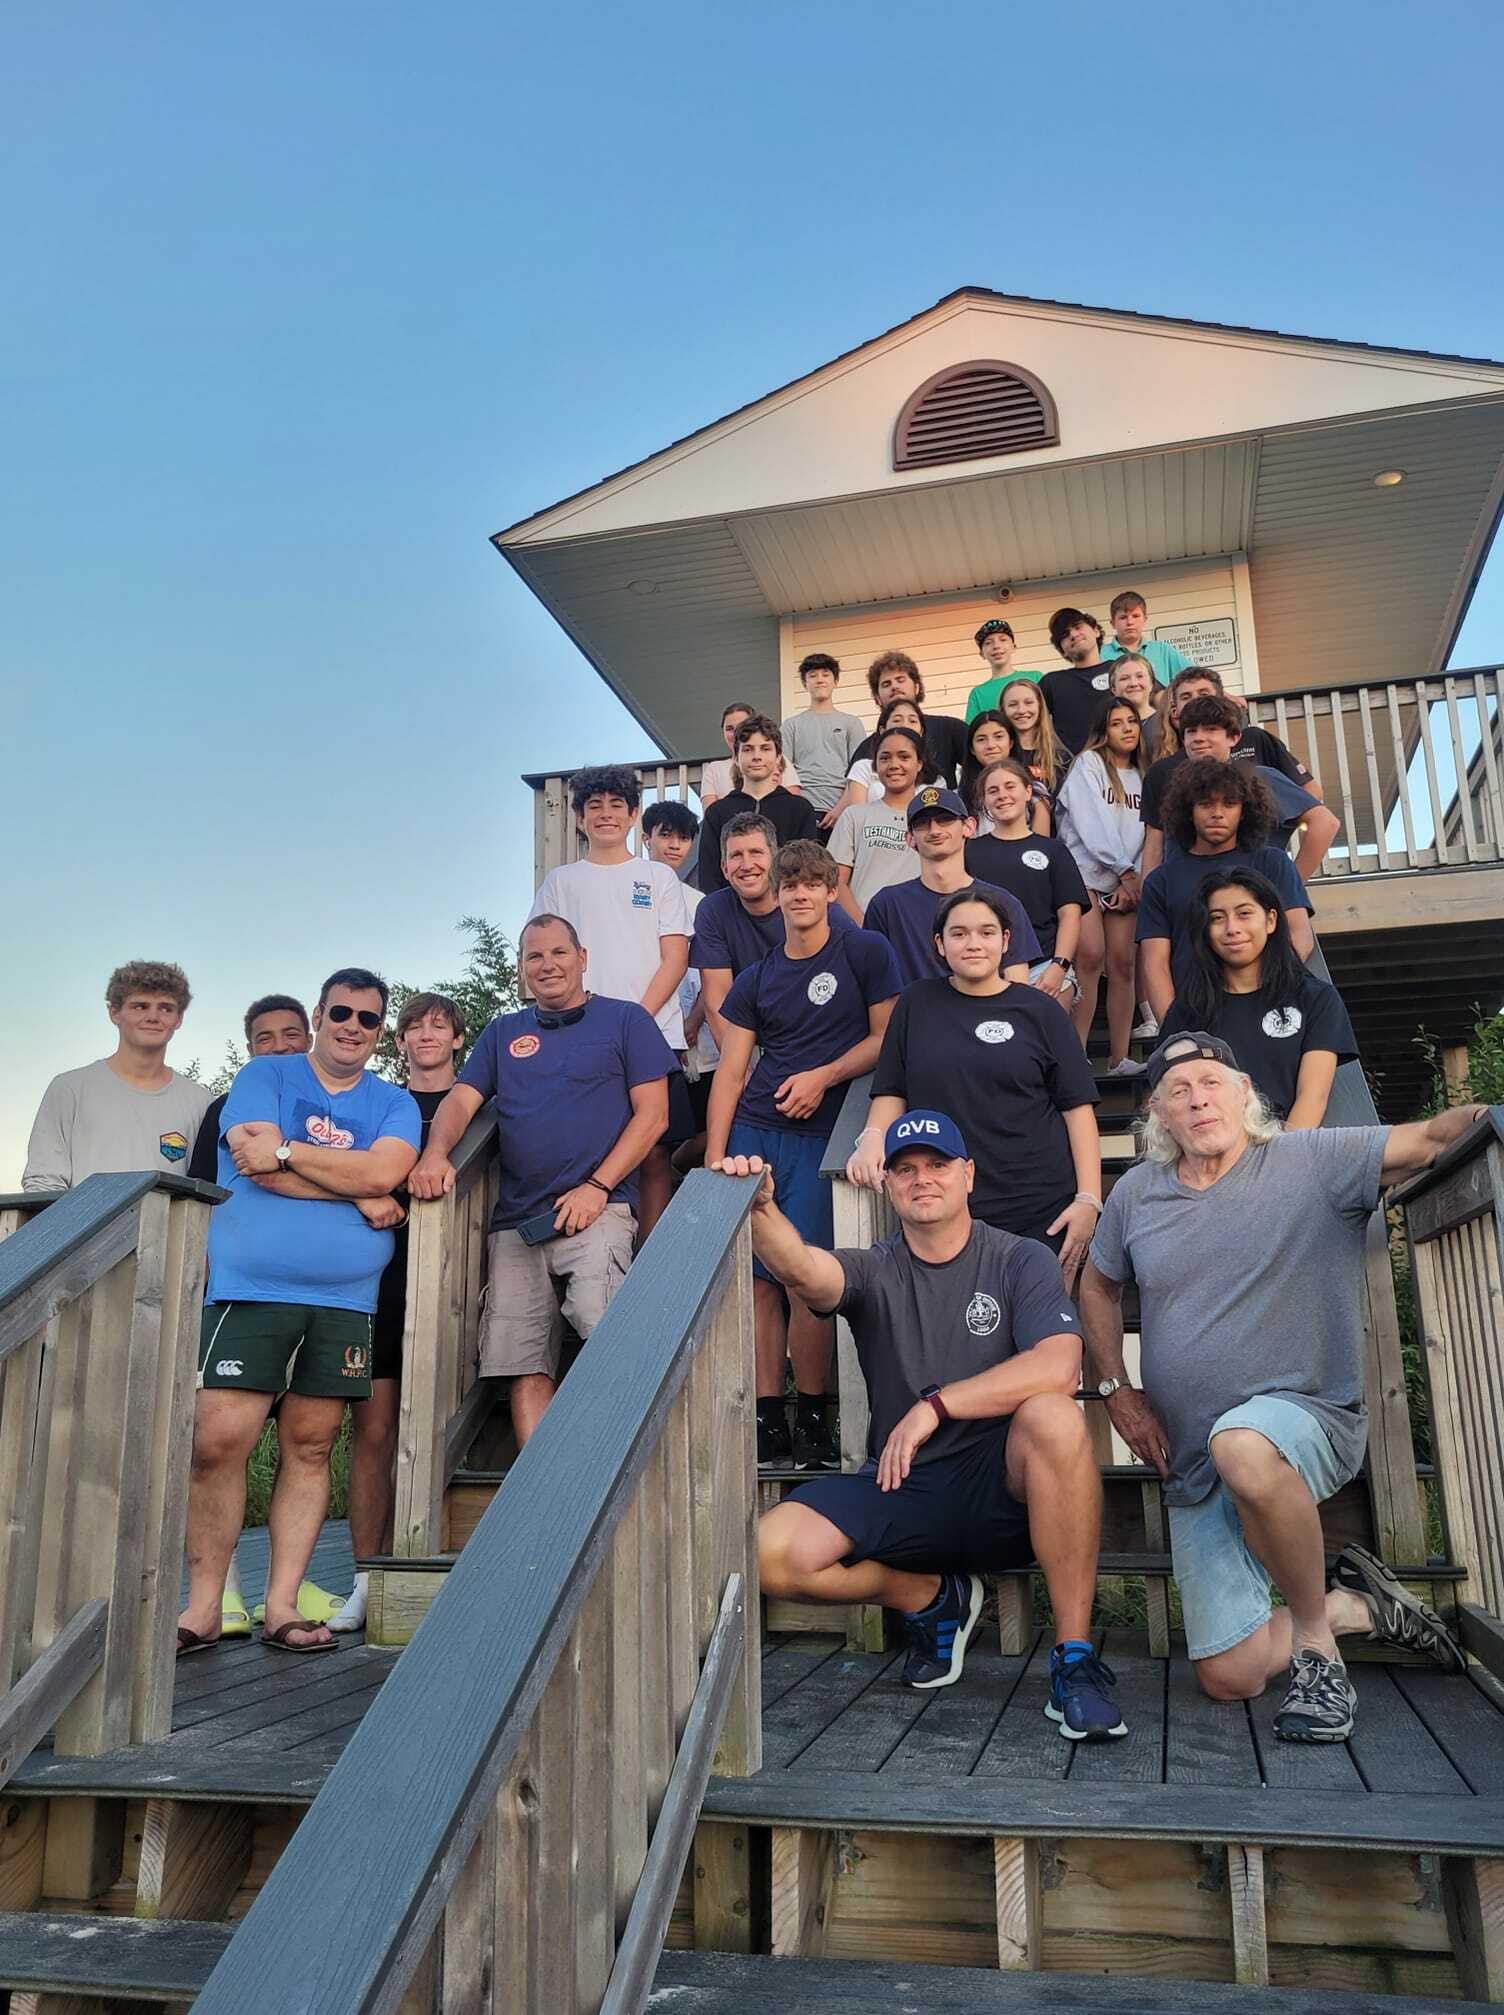 Members of the Westhampton Beach Fire Department Juniors did their annual beach cleanup at Rogers and Lashley beaches on August 3.  They will also be helping at an open house in August teaching fire safety, extinguishers and helping with the water games. COURTESY CODY HOYLE